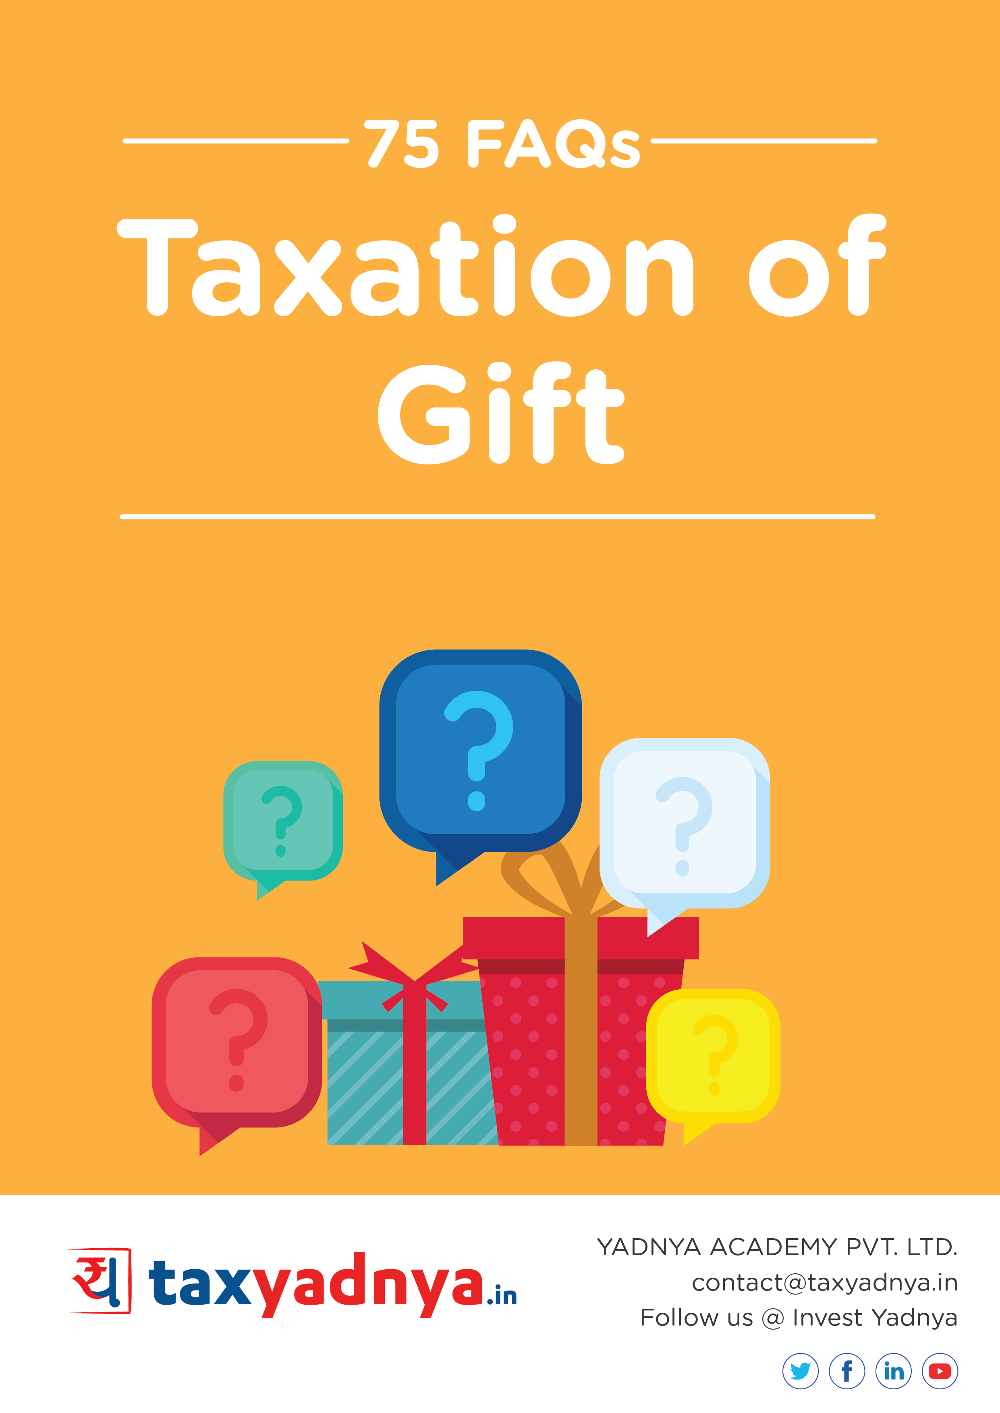 Understand in complete details on how taxation of Gifts is applicable in various scenarios and how you can save taxes by gifting. ✔Taxation ✔Gifting	